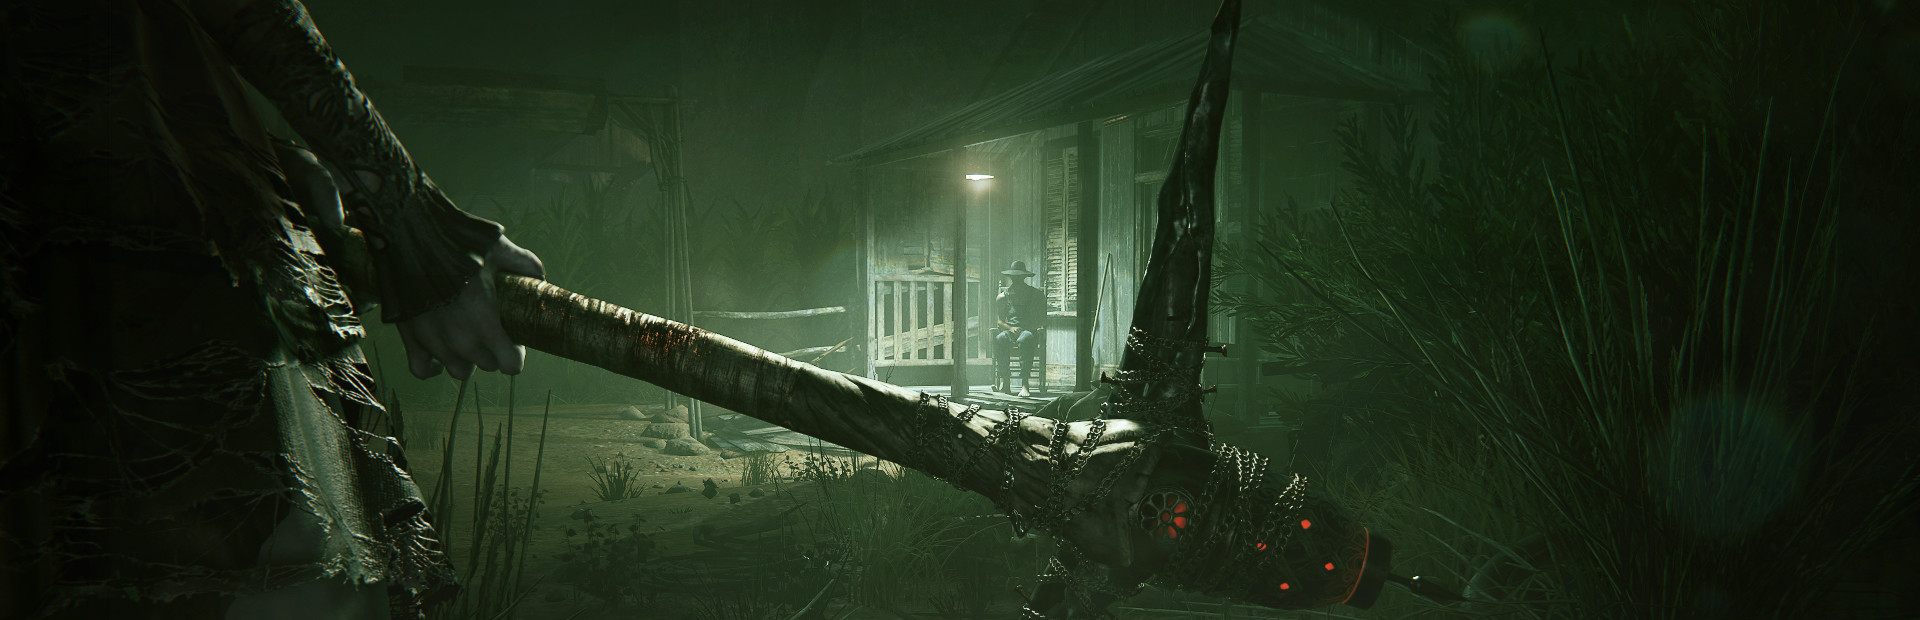 Outlast 2 cover image